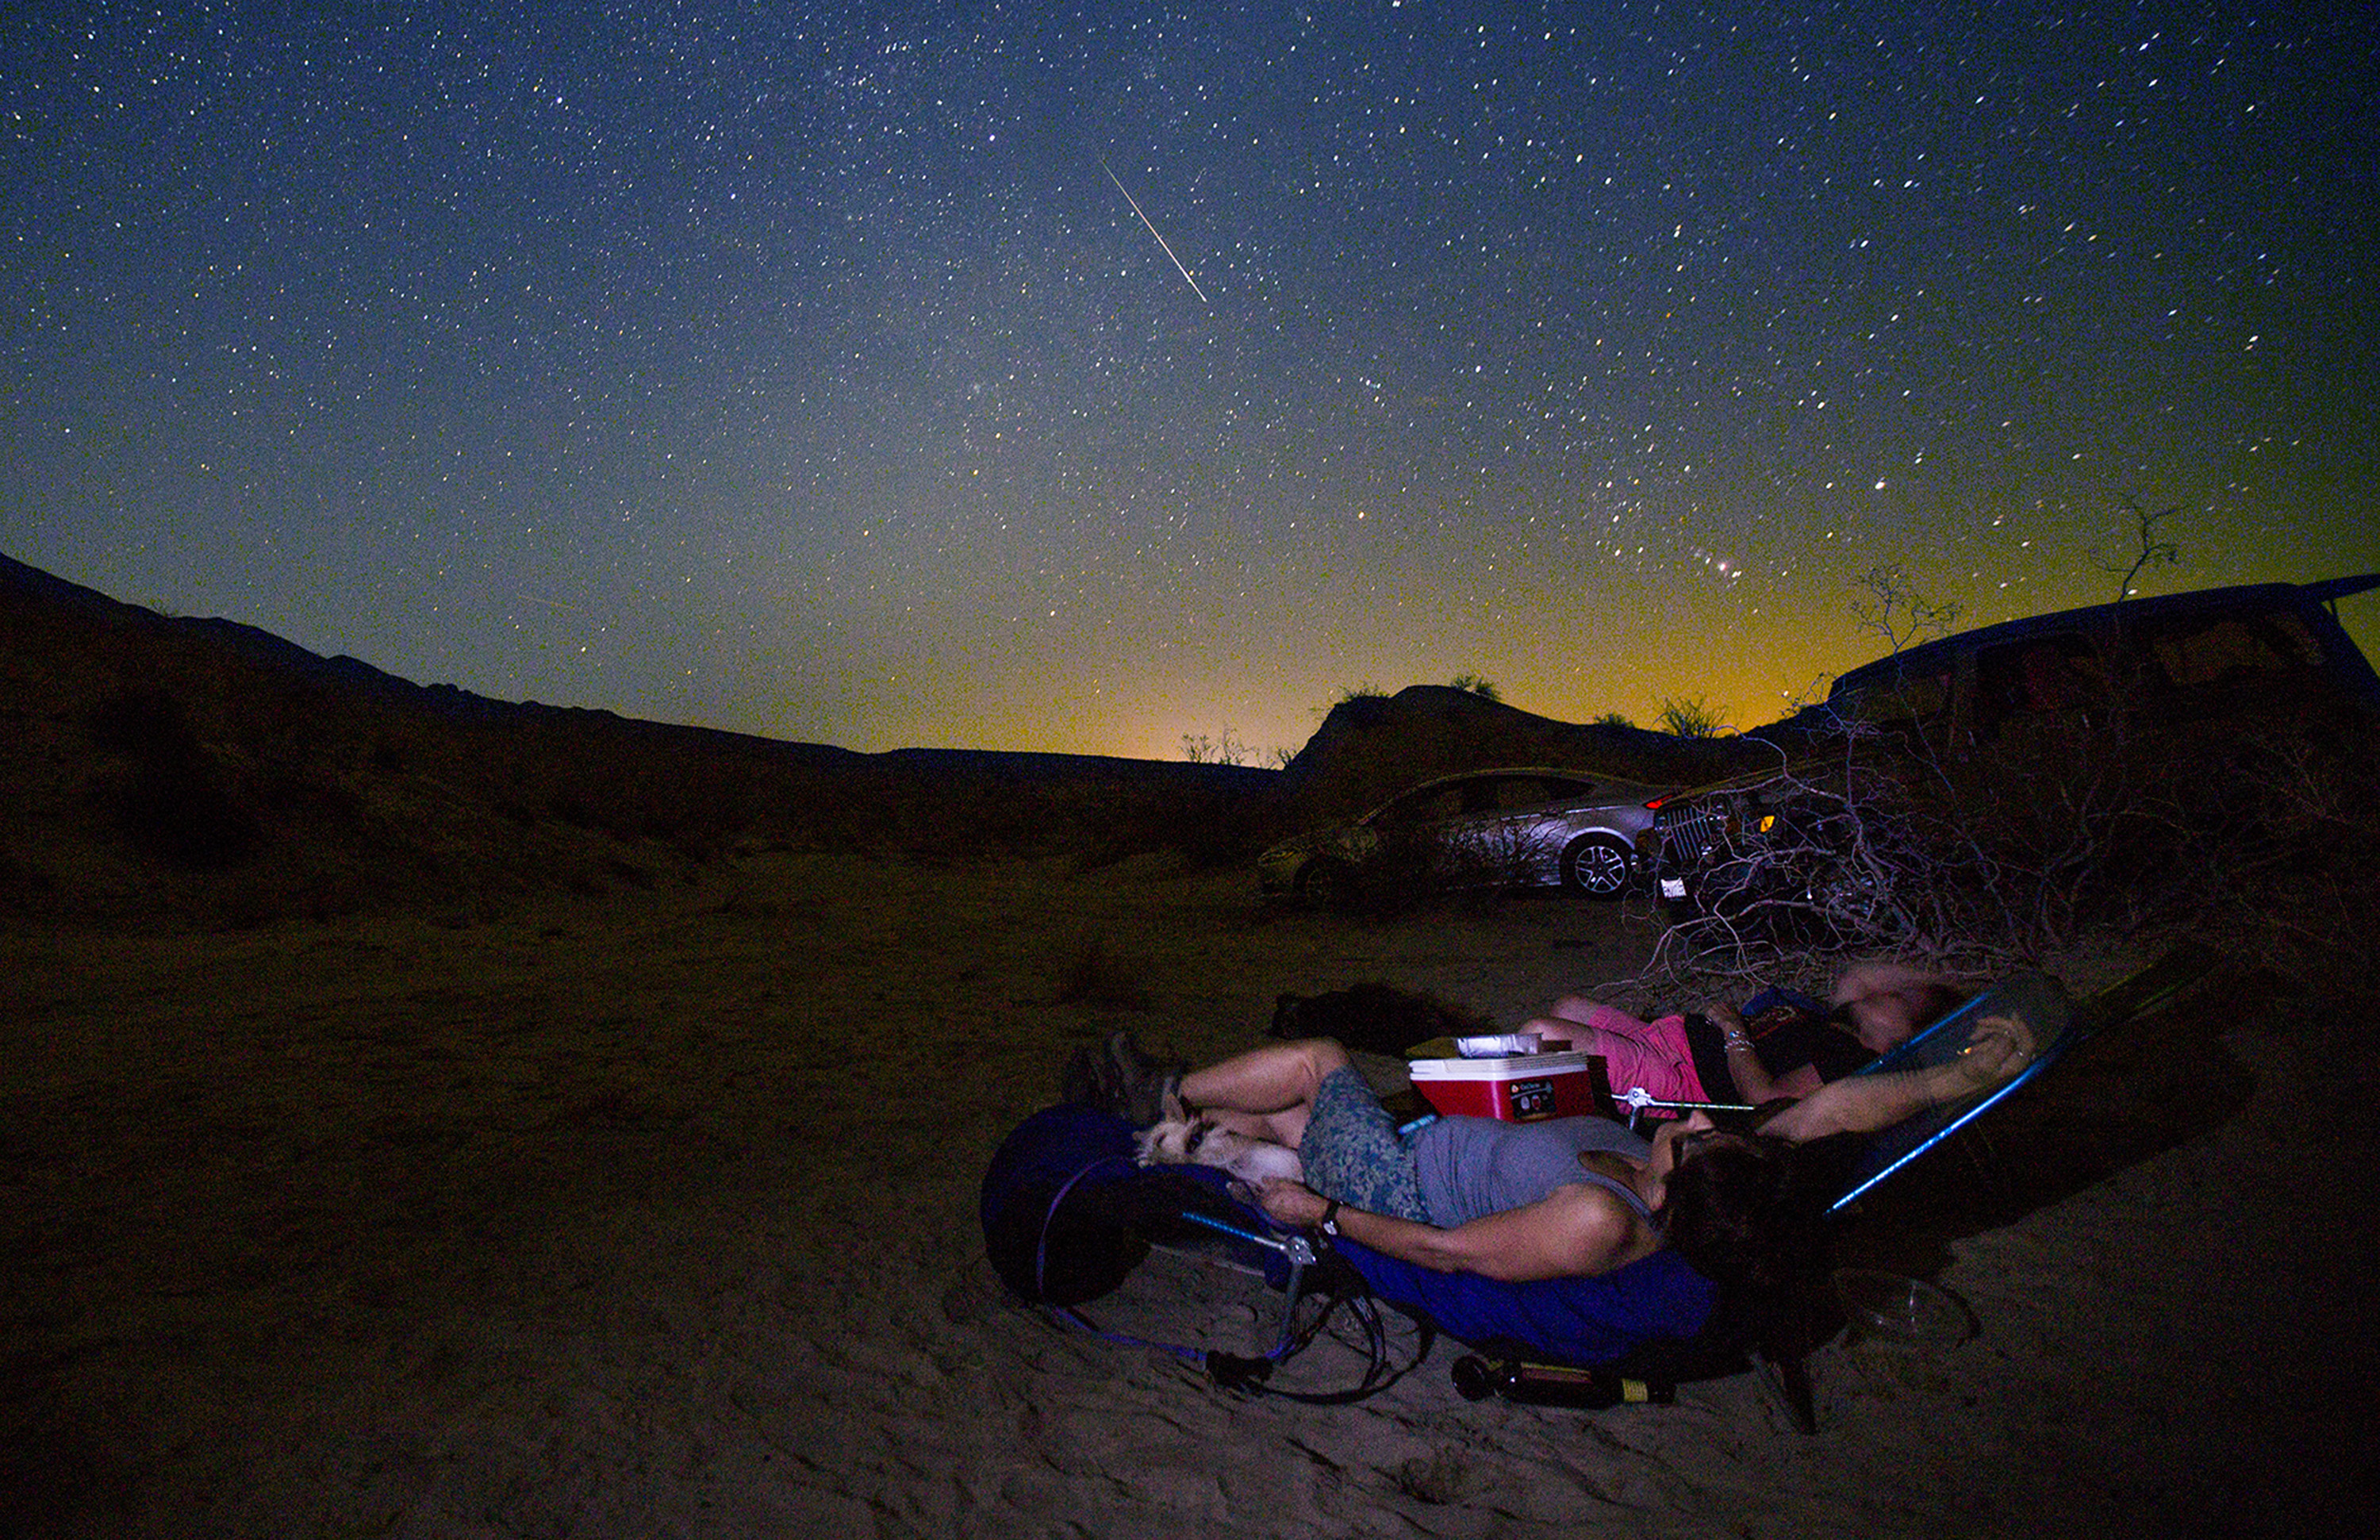 College photography professors Donna Cosentino and Judith Preston watch a Persied meteor streak through the starry sky above California's Anza Borrego Desert State Park on Thursday, Aug. 13, 2015. The orange glow is from the lights of Salton City, about 10 miles away. Scores of the "shooting stars" were observed during the annual skyshow when Earth passed through interplanetary matter from an orbiting comet. (Don Bartletti/Los Angeles Times/TNS)